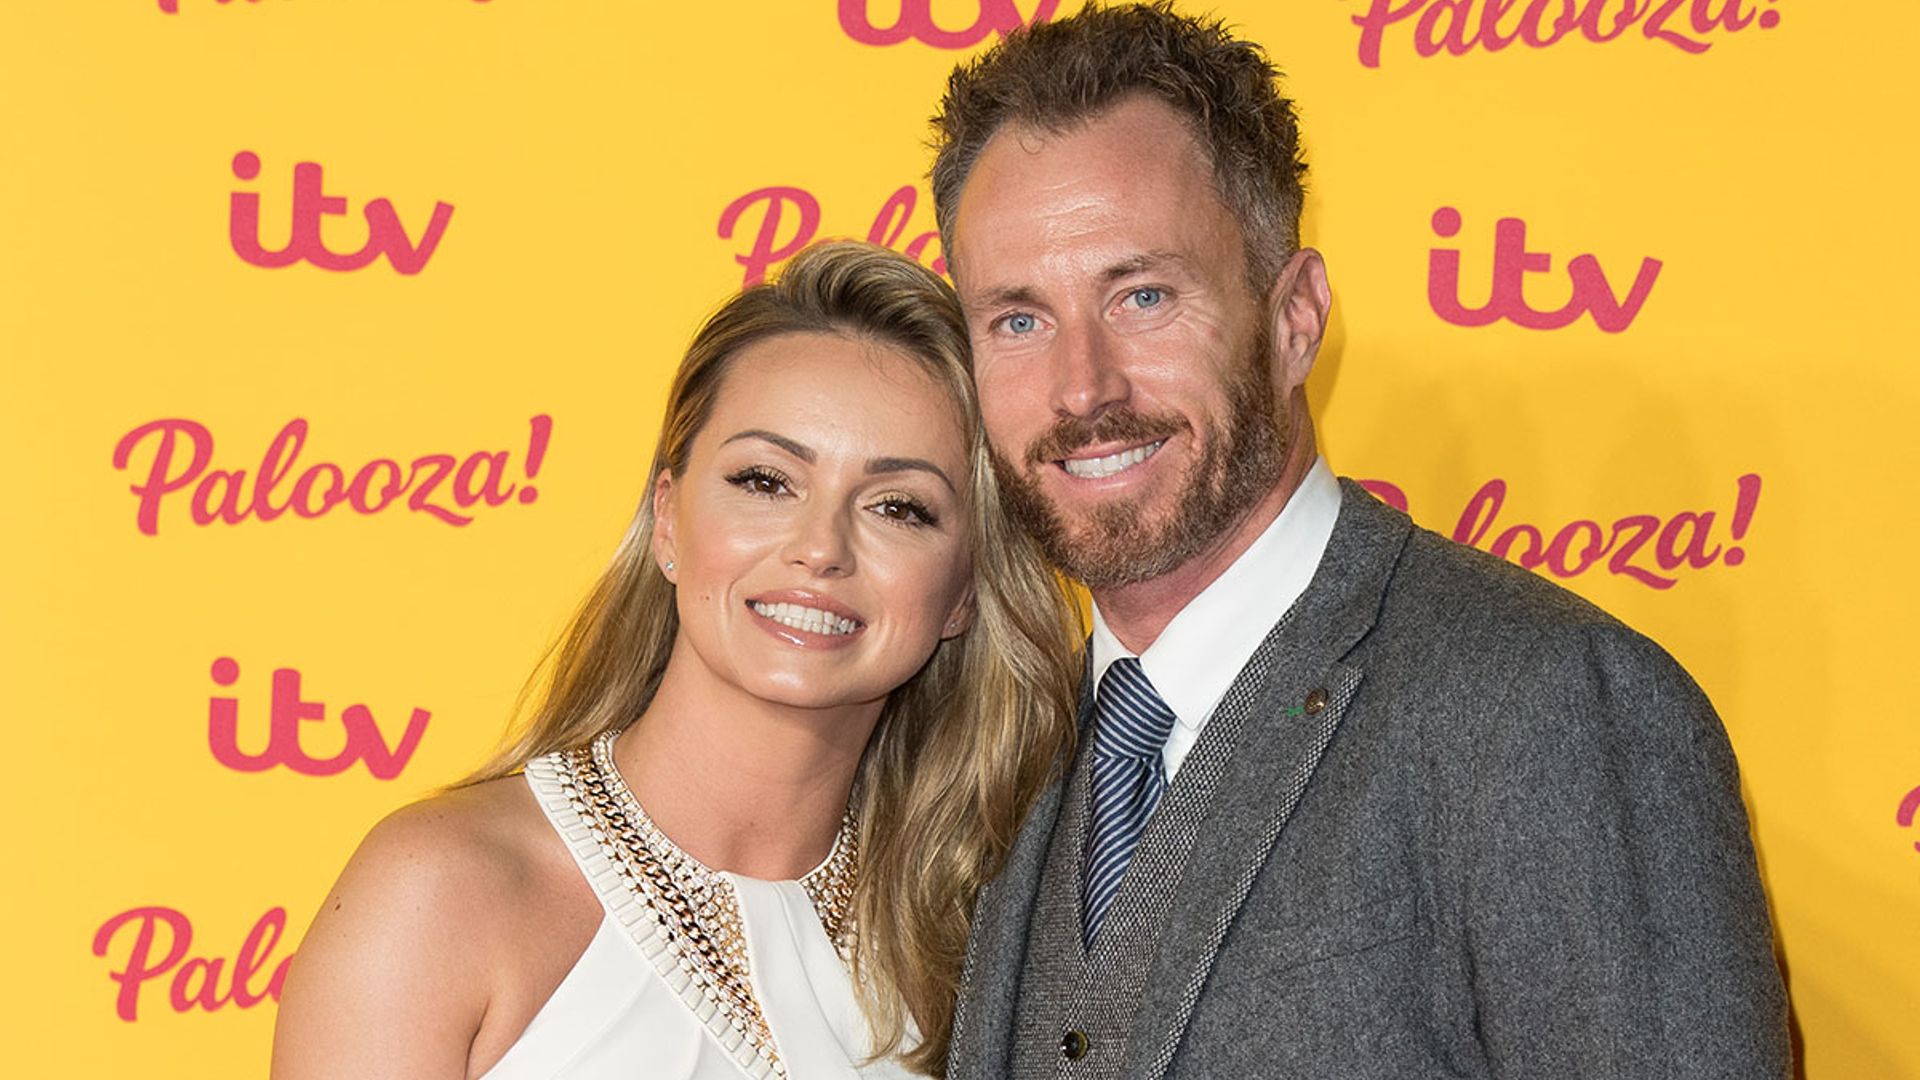 New dad James Jordan's sweet act of kindness revealed following father's stroke